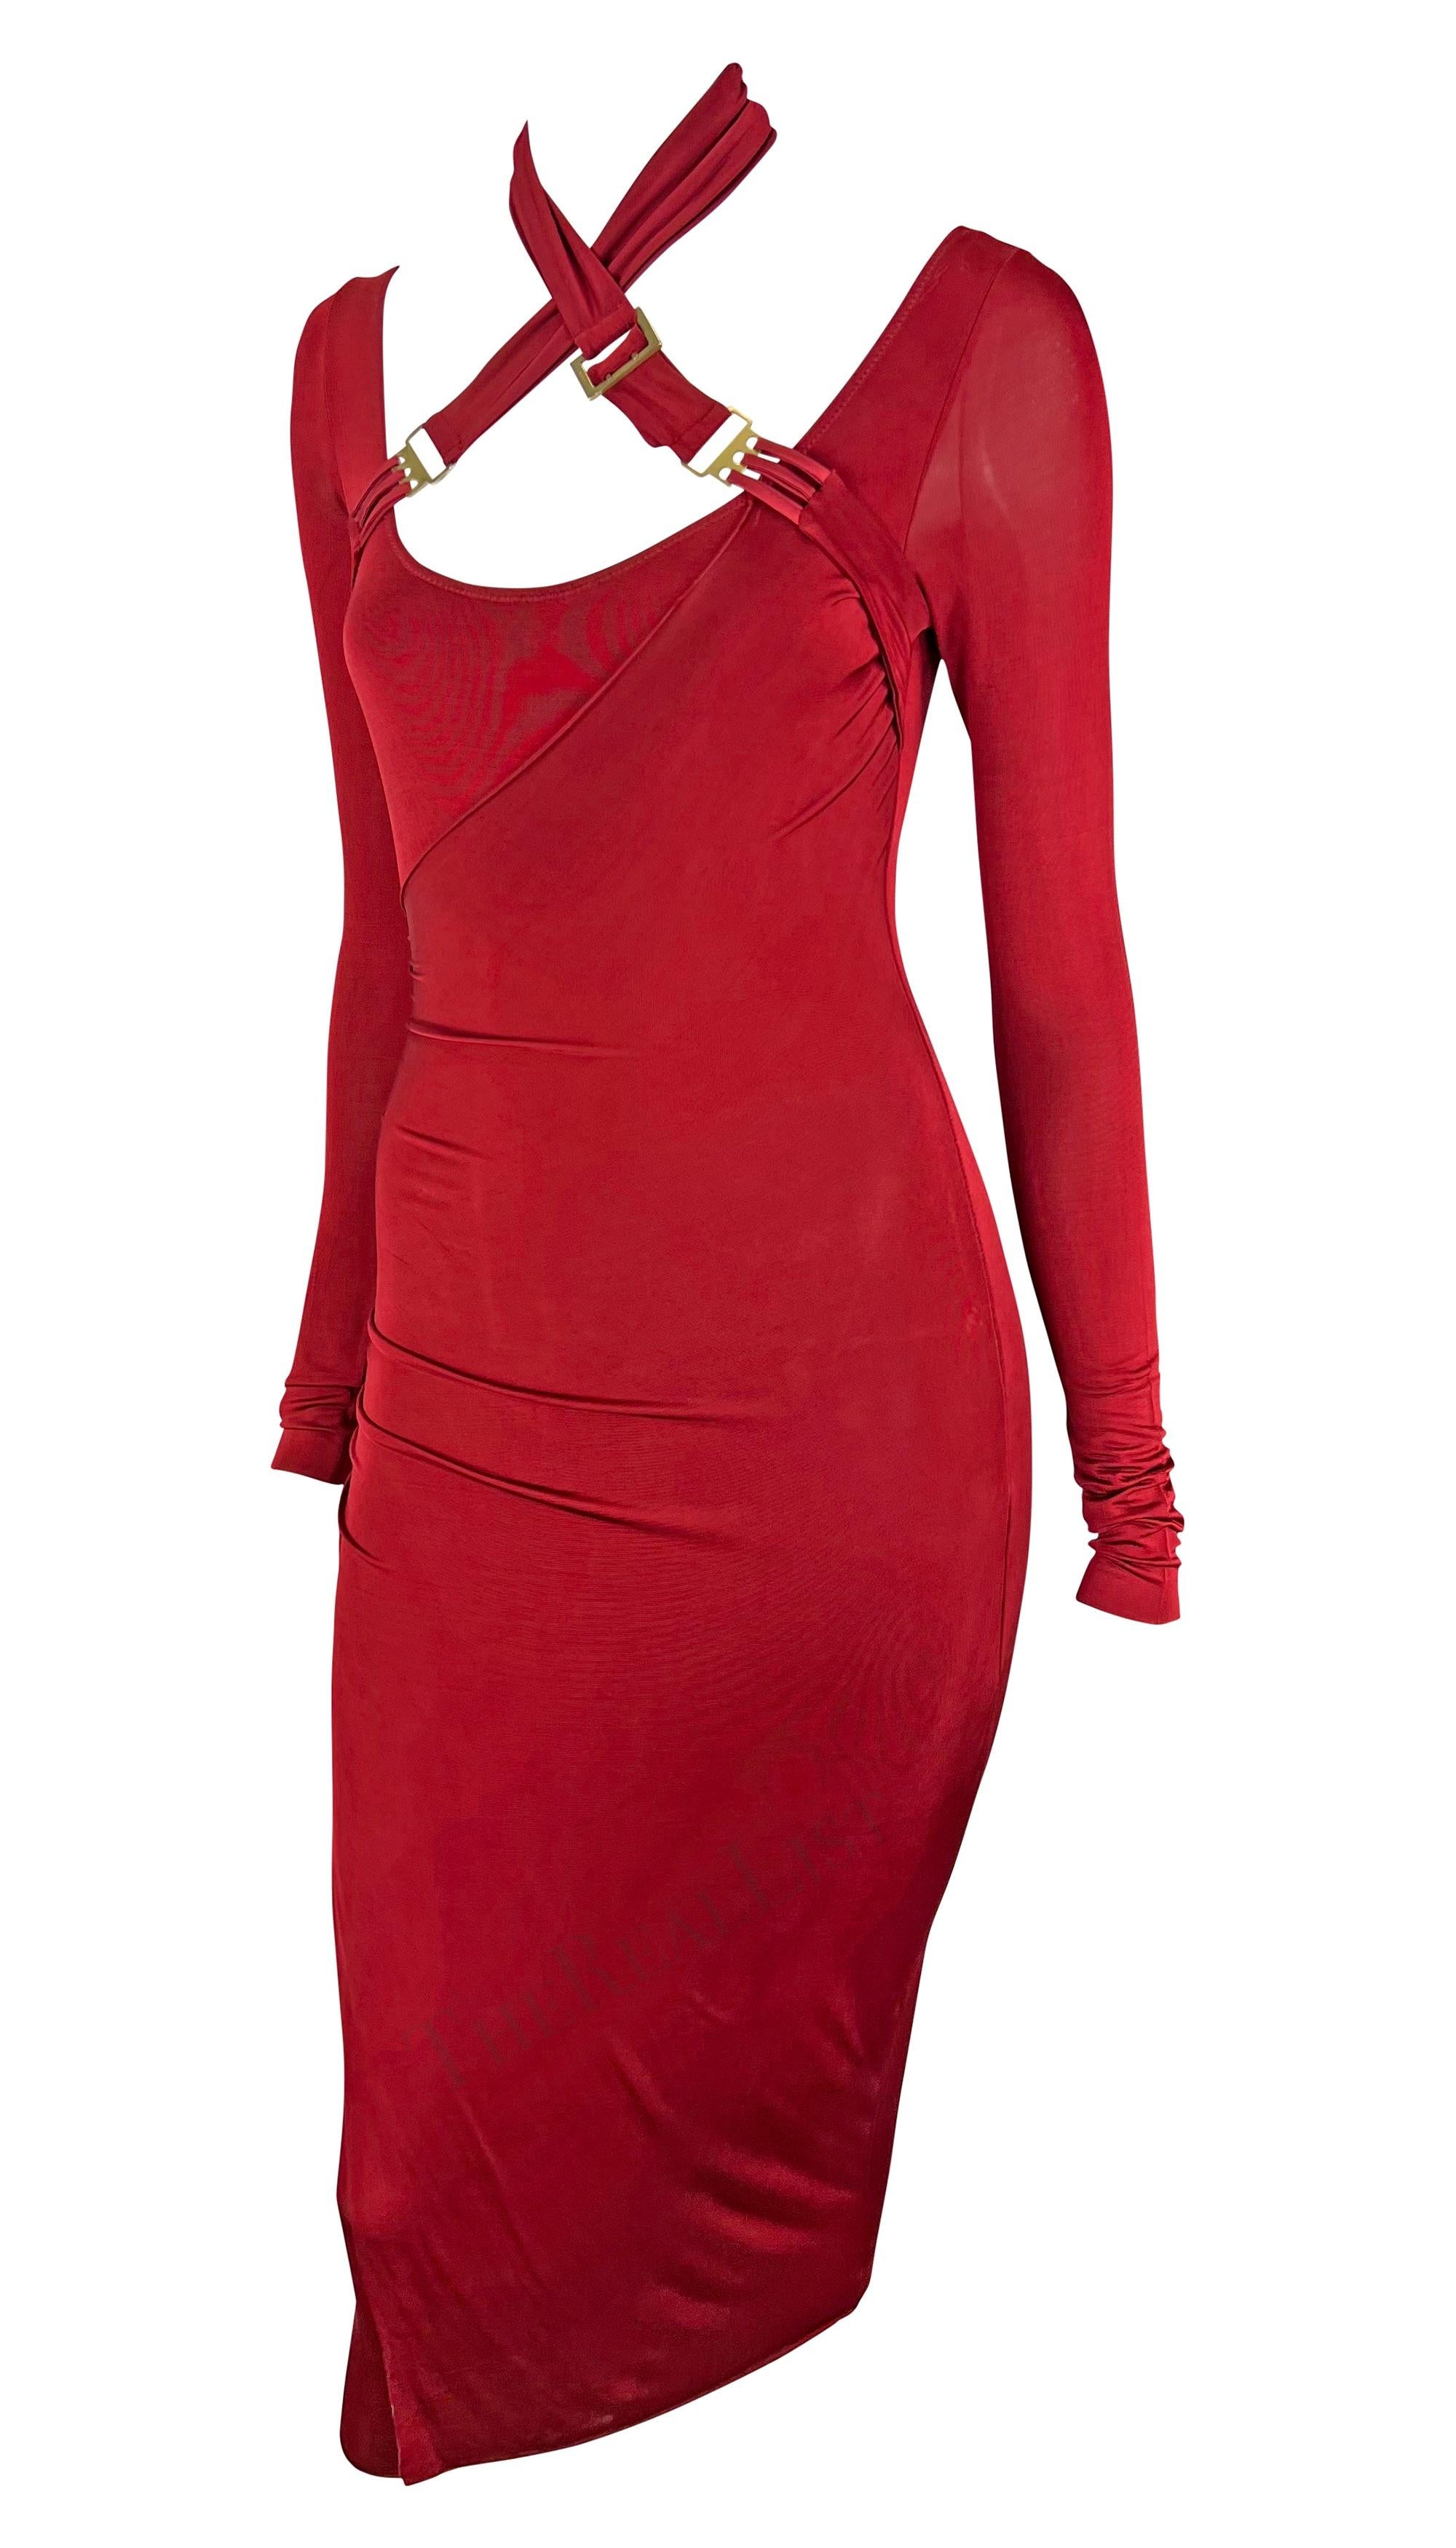 F/W 2003 Gucci by Tom Ford Red Bondage Strap Convertible Stretch Bodycon Dress In Good Condition For Sale In West Hollywood, CA